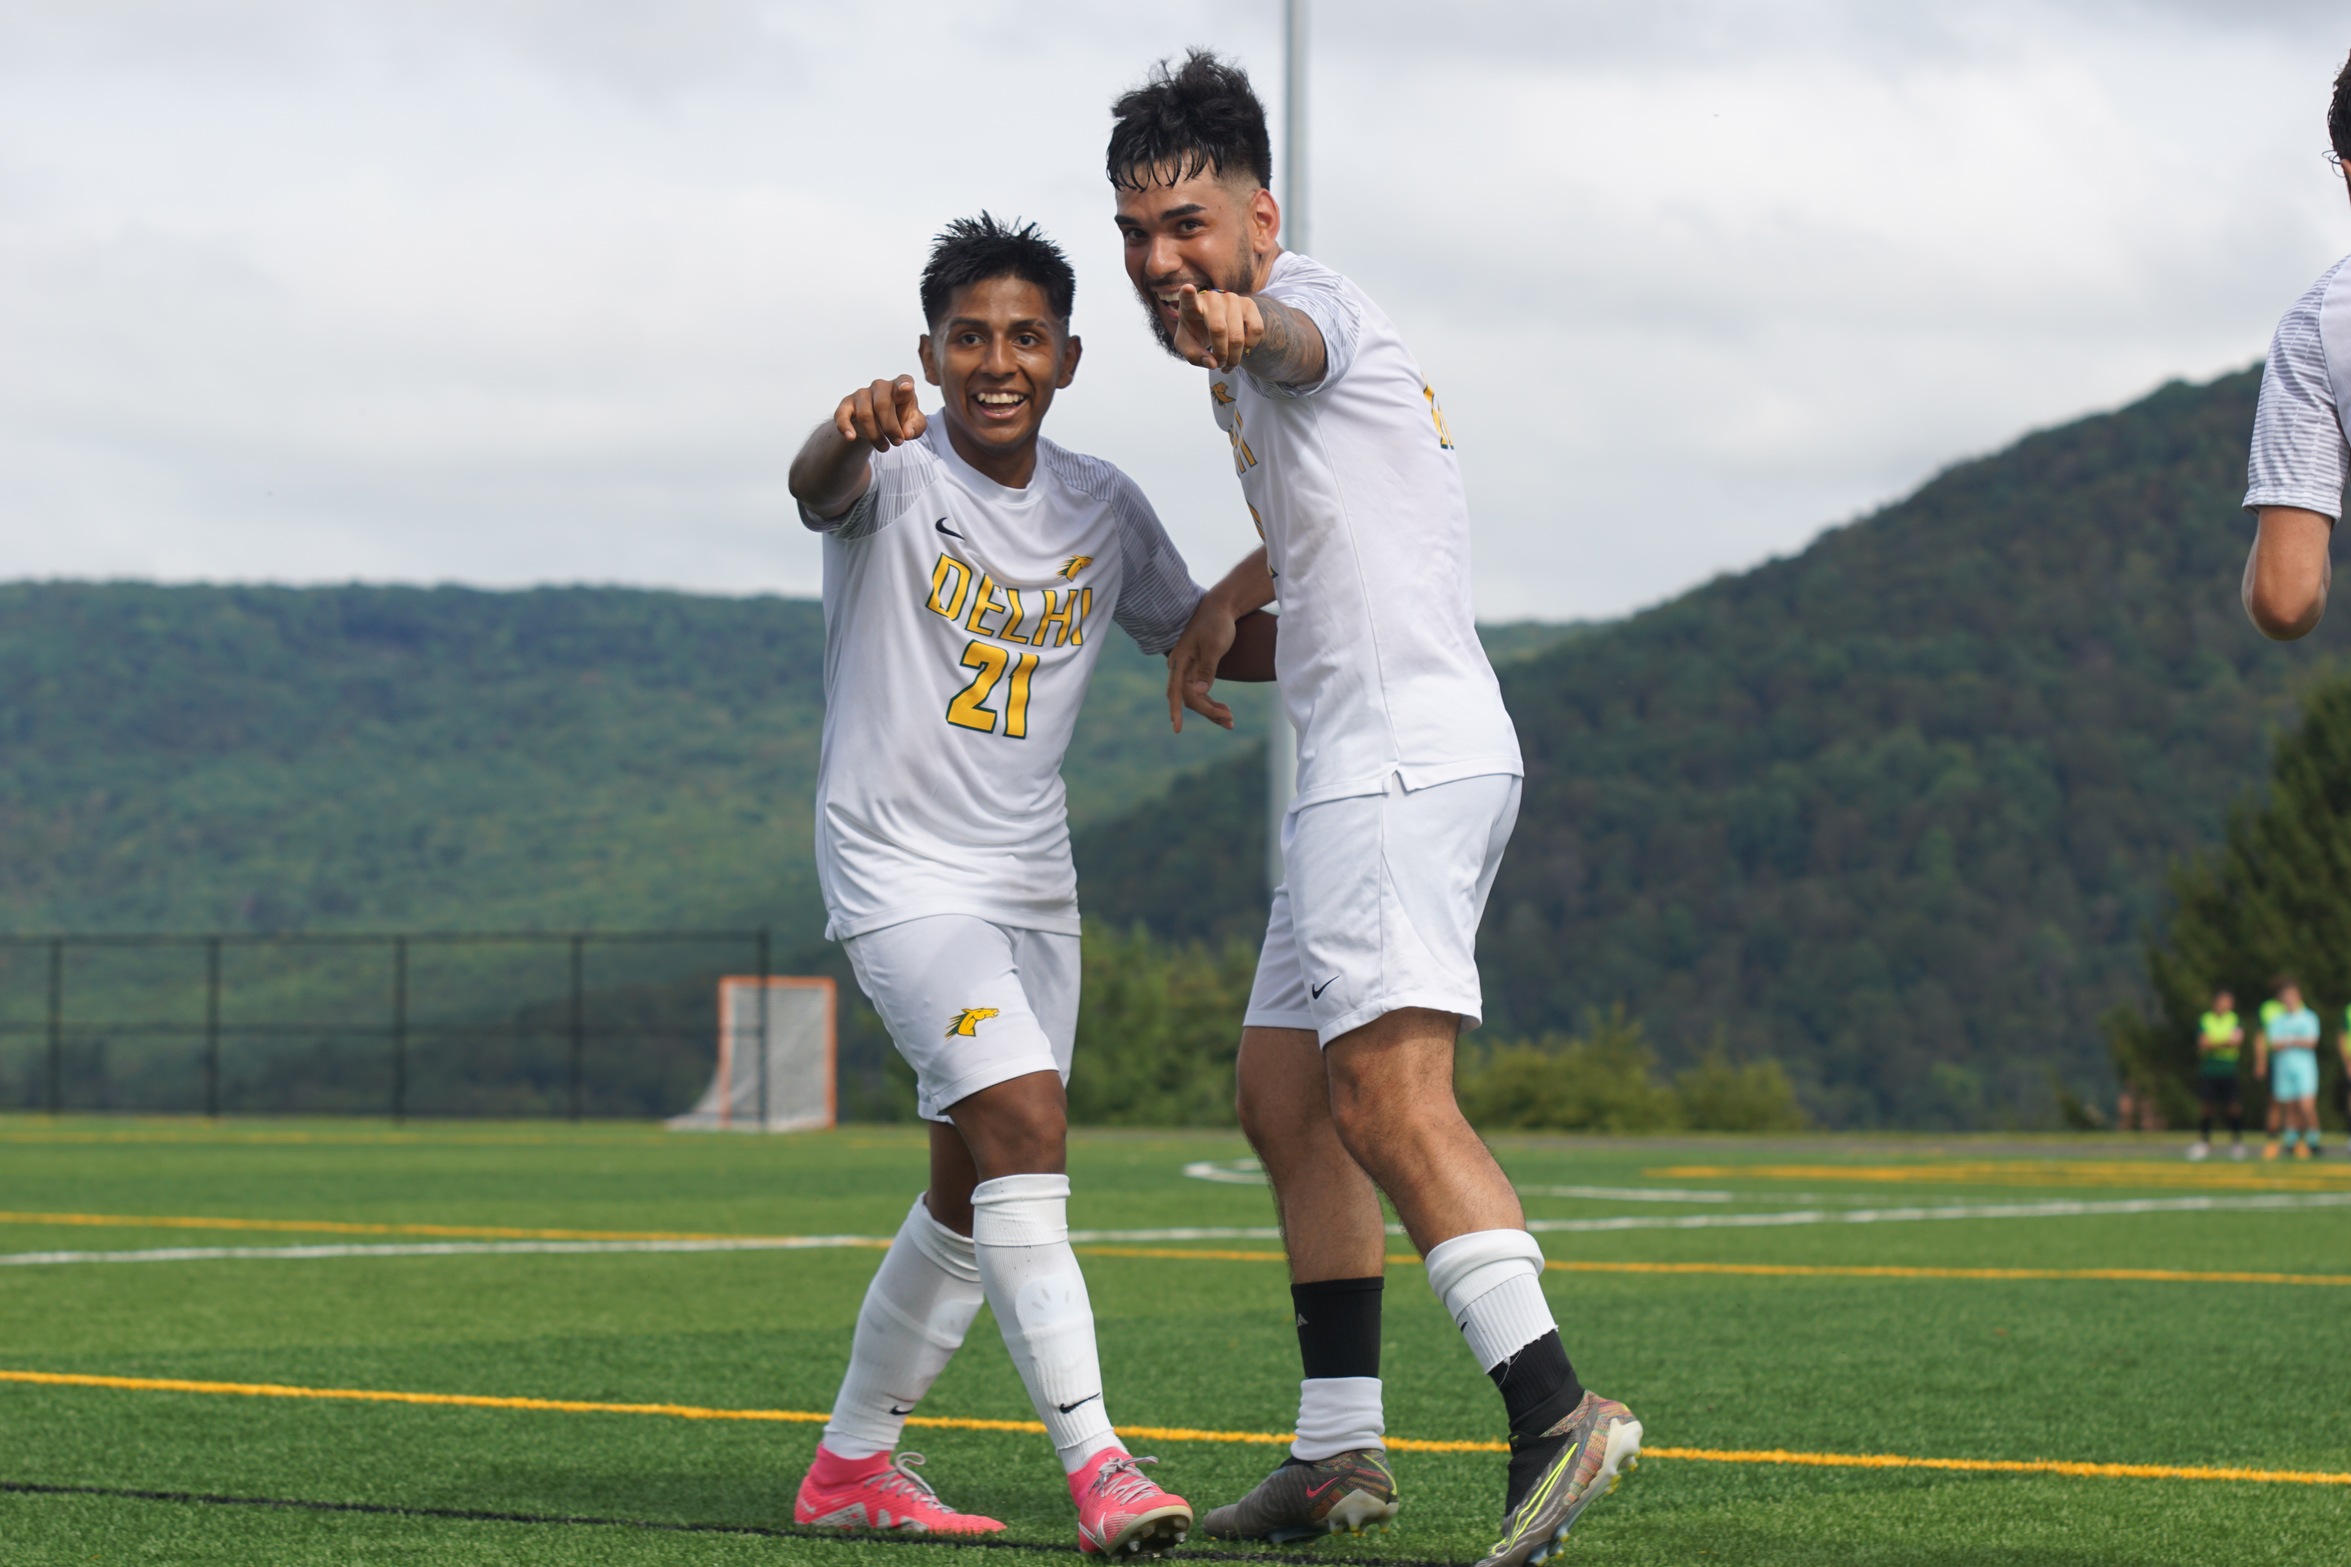 Men's Soccer remains unbeaten after 2-0 win over Marywood on Neil Riddell Field